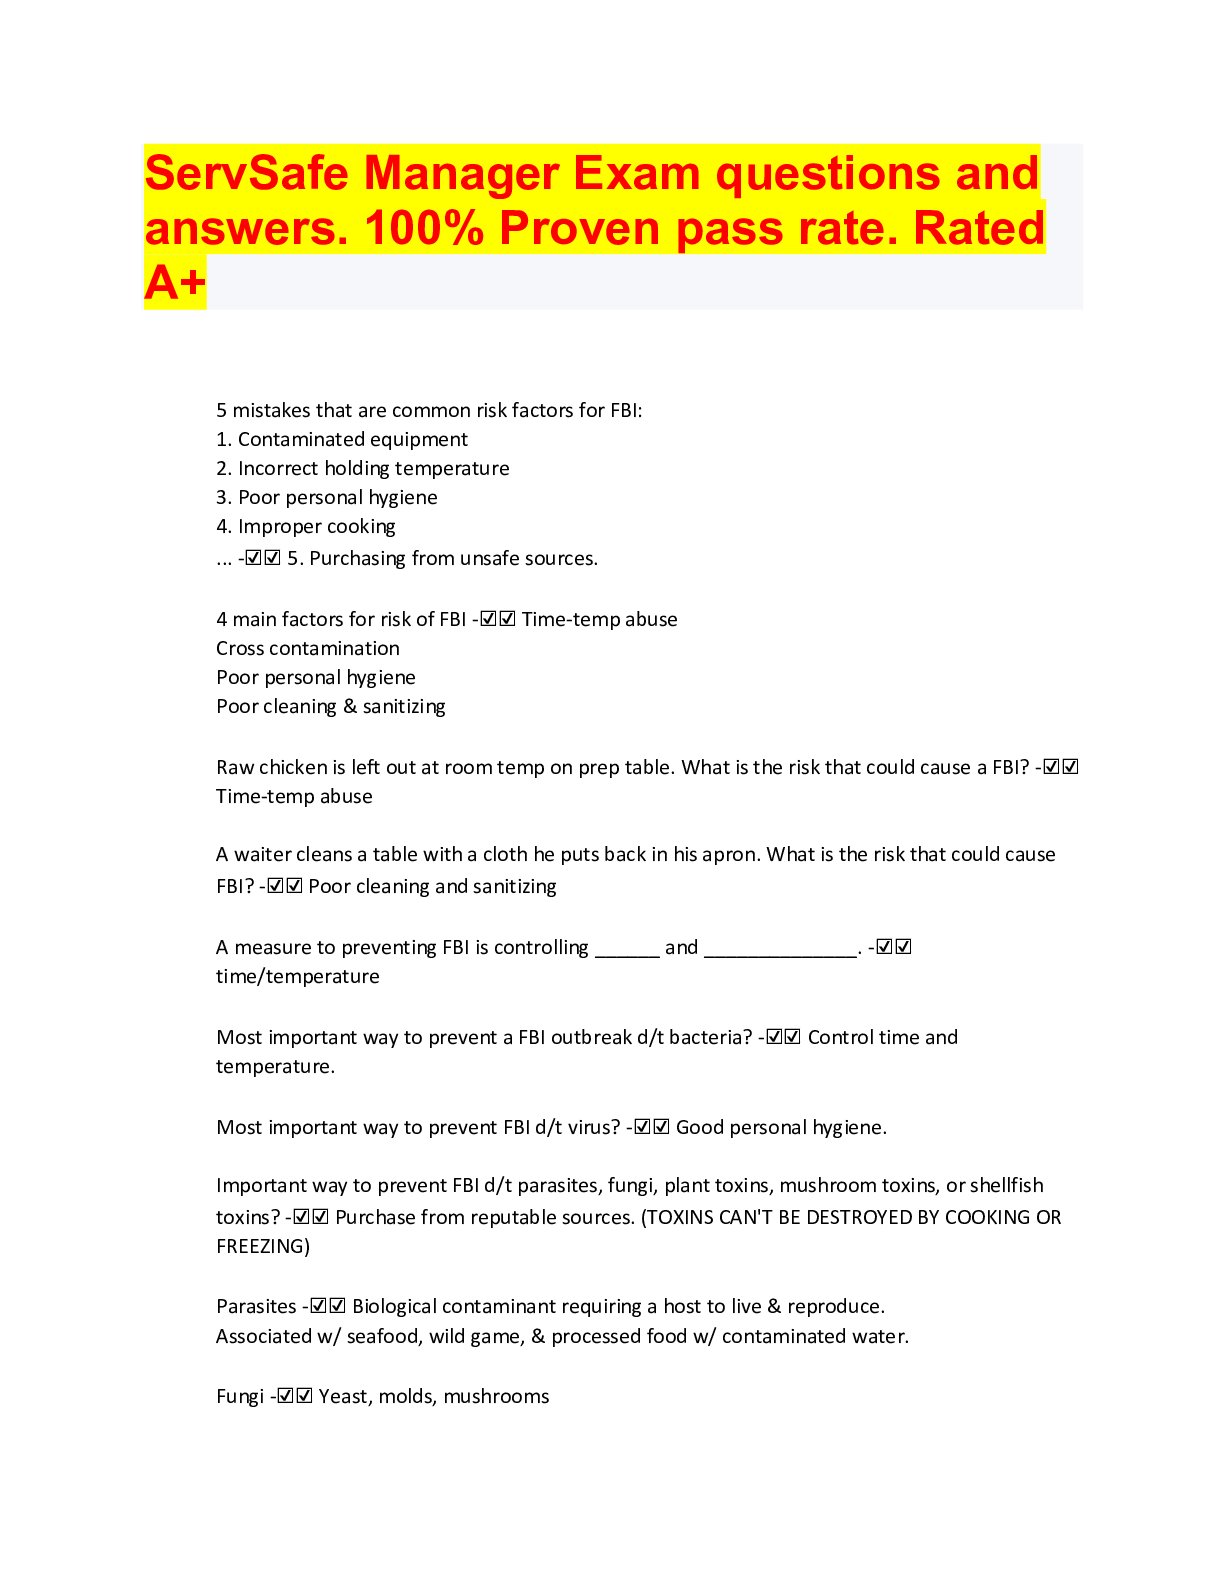 ServSafe Manager Exam questions and answers. 100 Proven pass rate